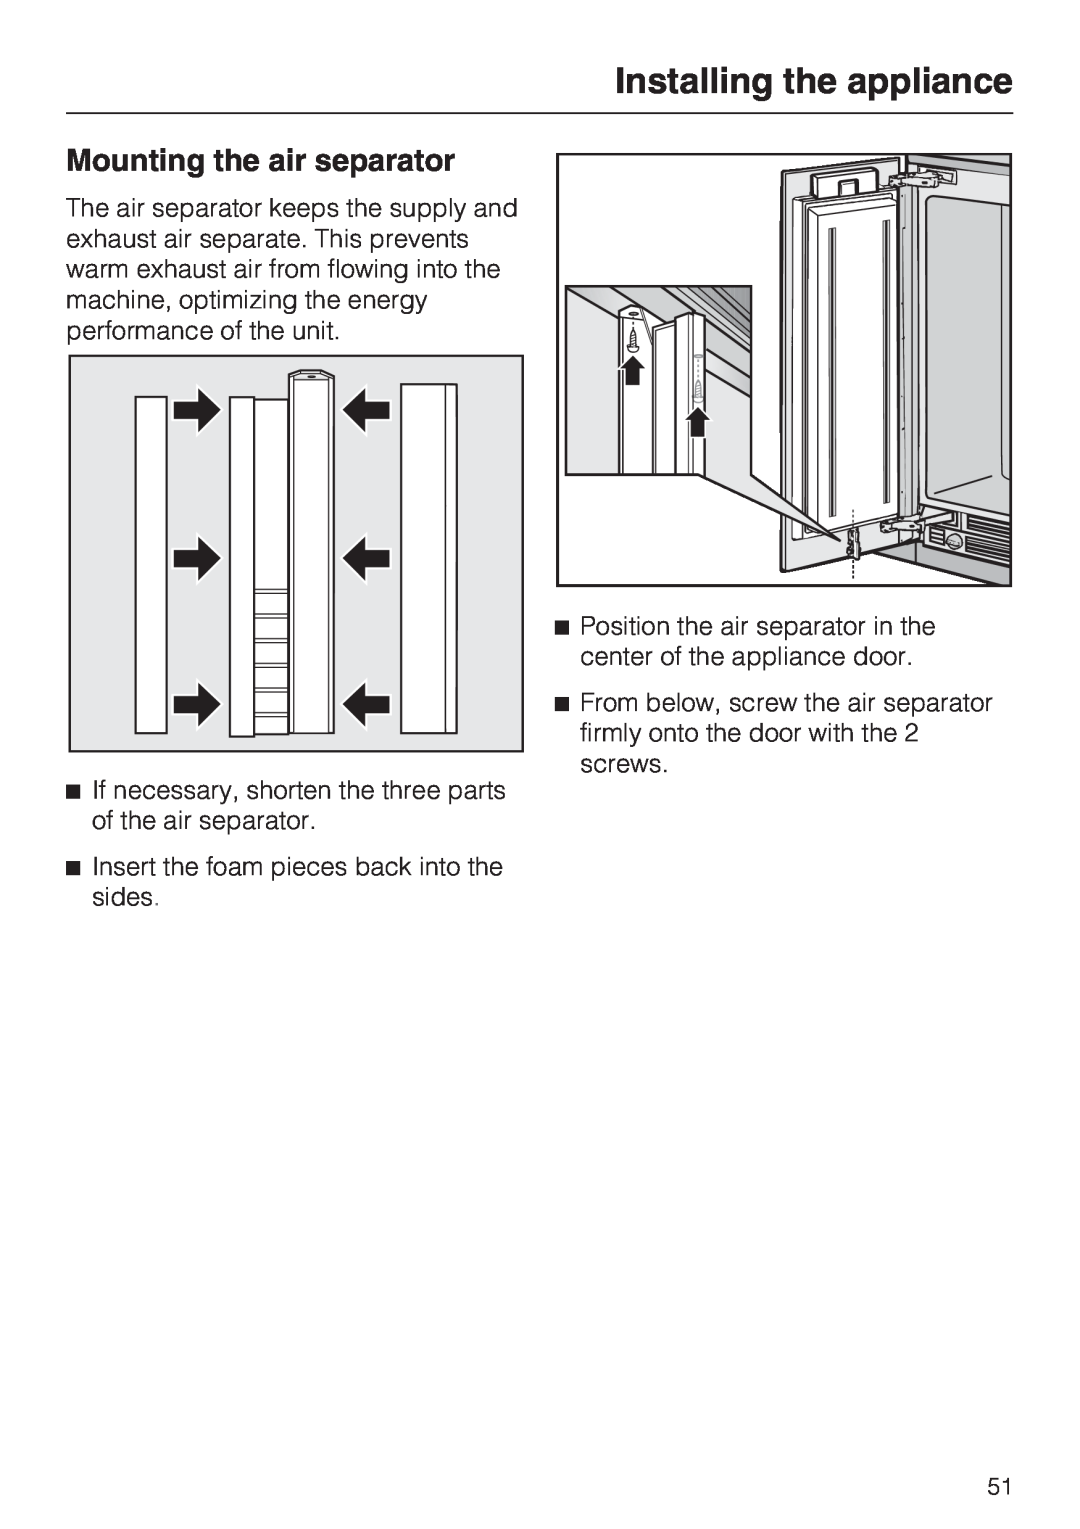 Miele K1811SF, K1801SF, K1901SF, K1911SF installation instructions Mounting the air separator, Installing the appliance 